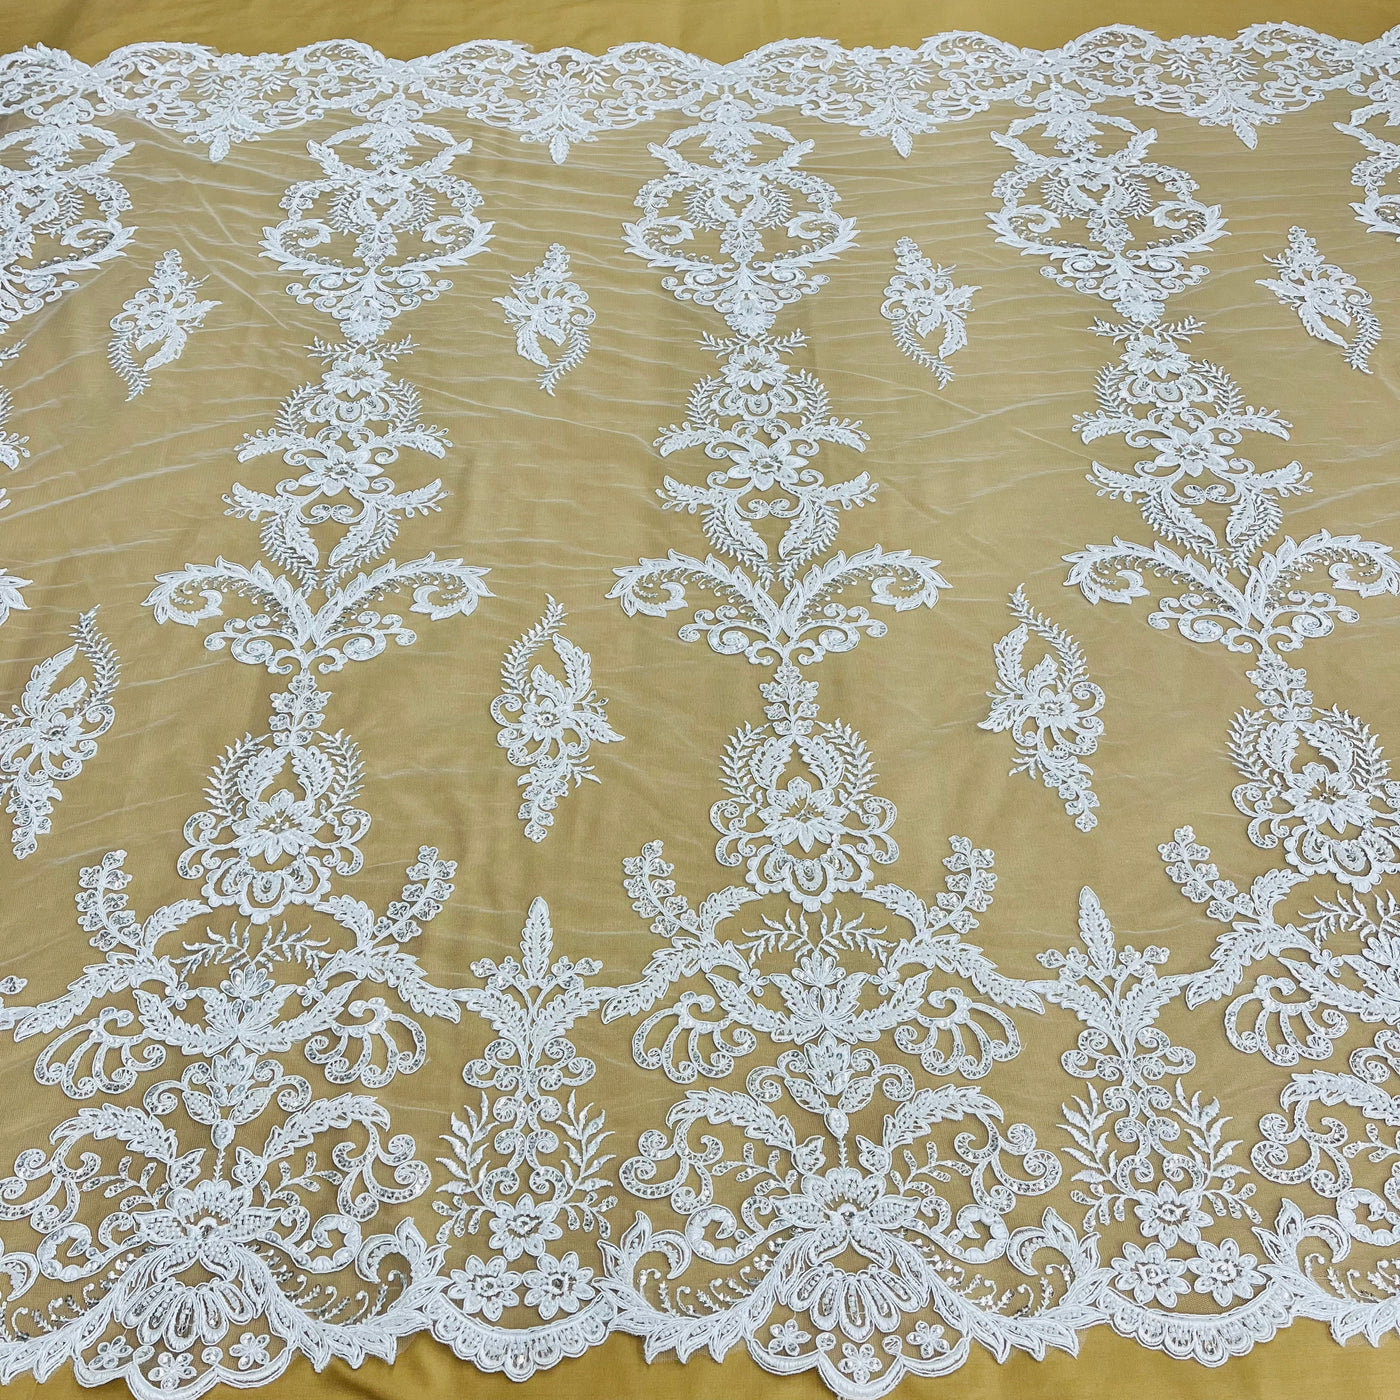 Corded & Beaded Bridal Lace Fabric Embroidered on 100% Polyester Net Mesh. Sold the yard. Lace Usa